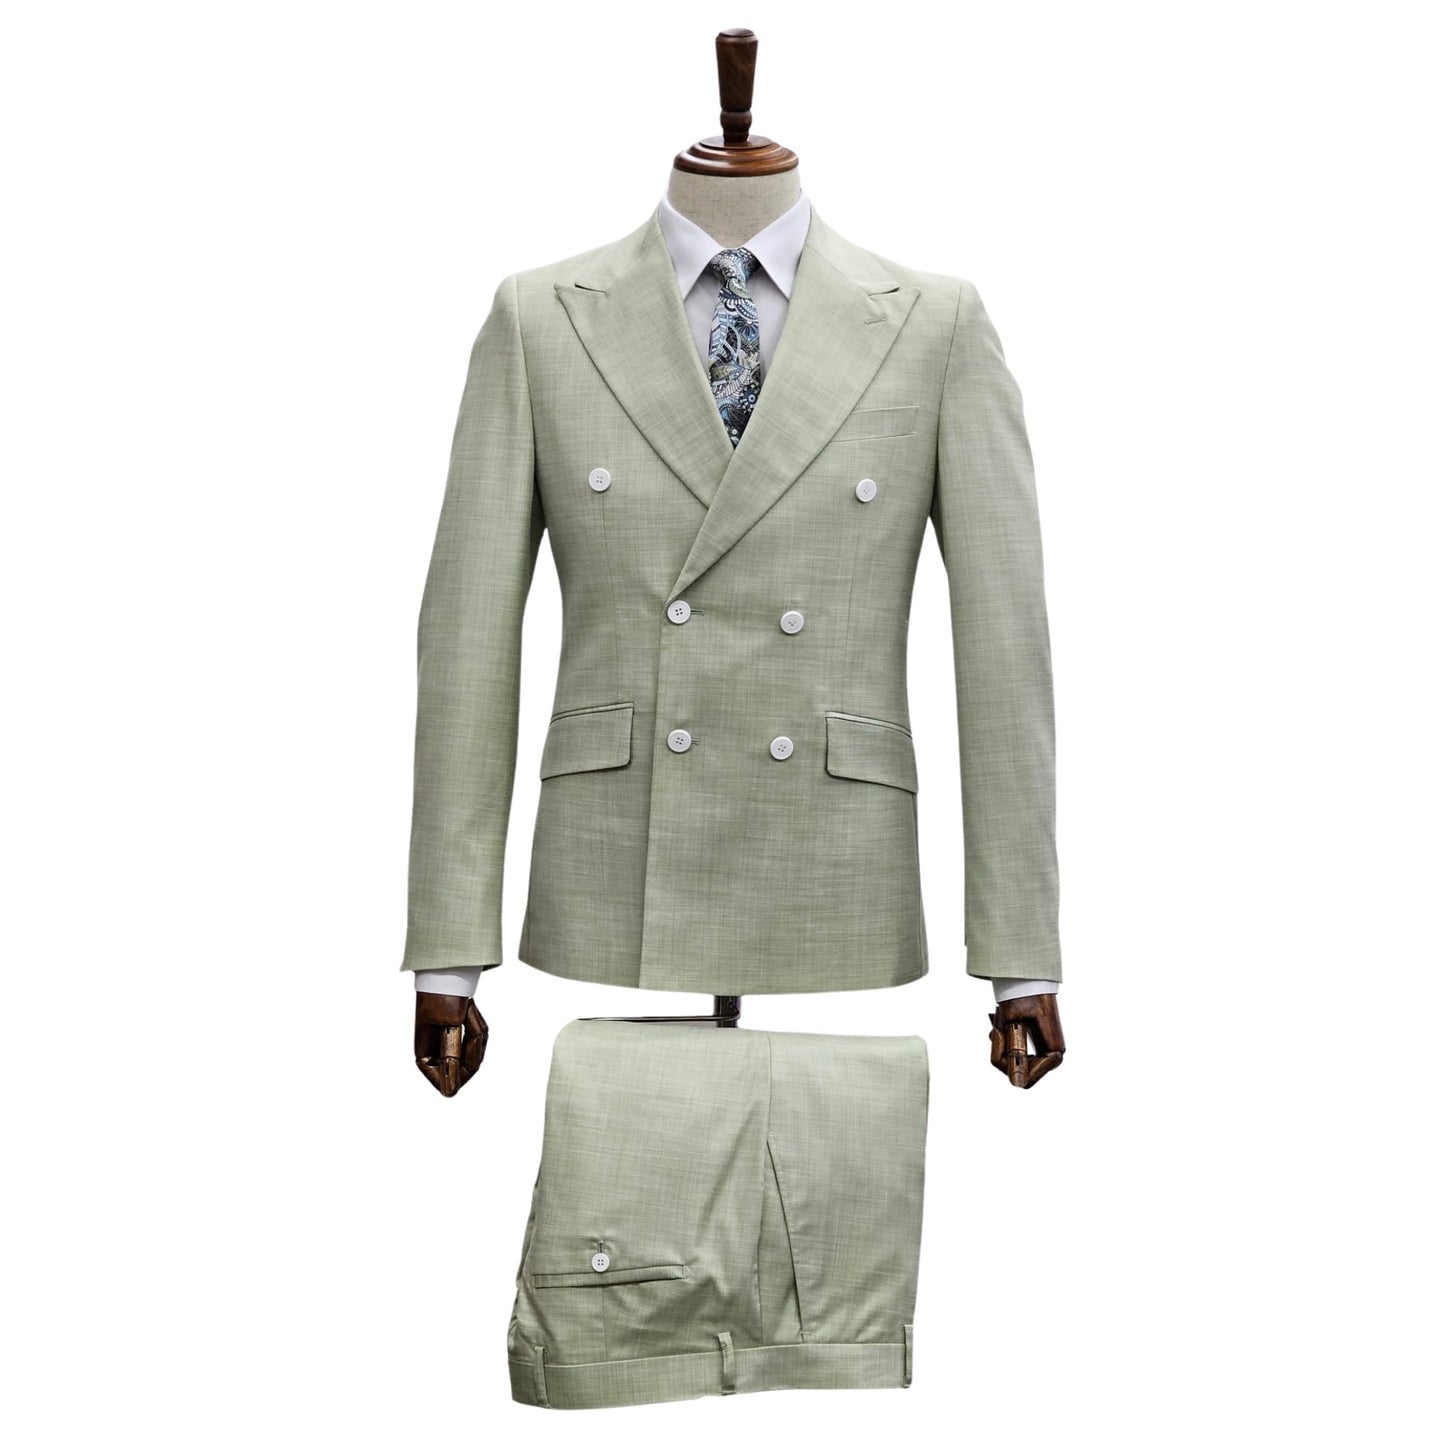 Chic Sage Elegance Double-Breasted Suit set on a mannequin